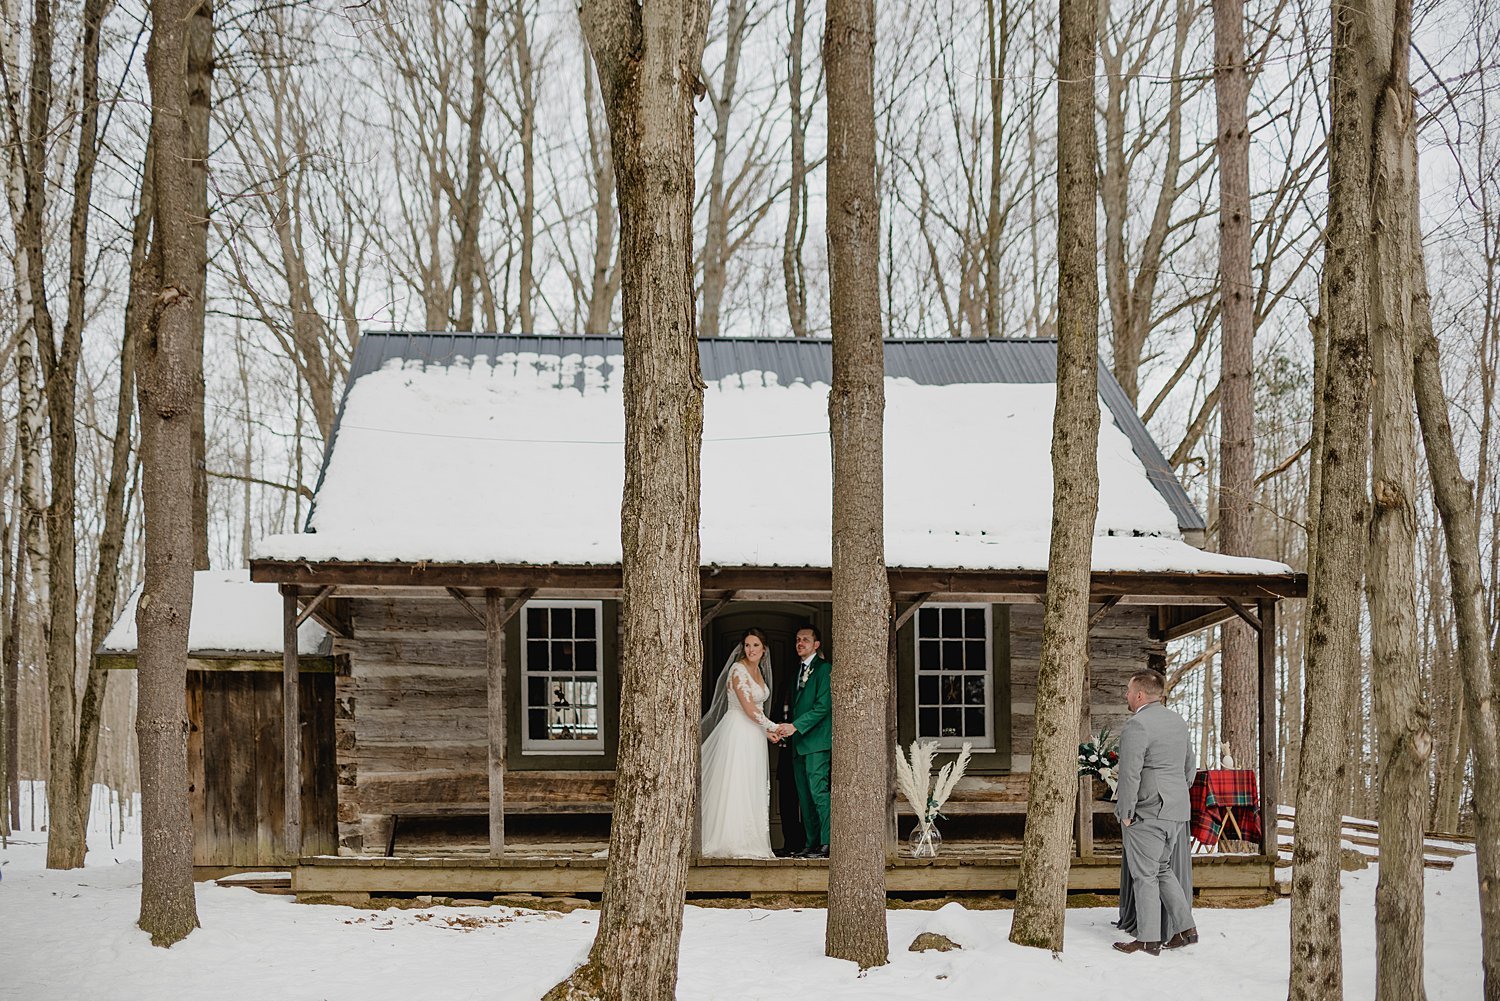 Intimate Winter Elopement at O'Hara Mill Homestead in Madoc, Ontario | Prince Edward County Wedding Photographer | Holly McMurter Photographs_0013.jpg